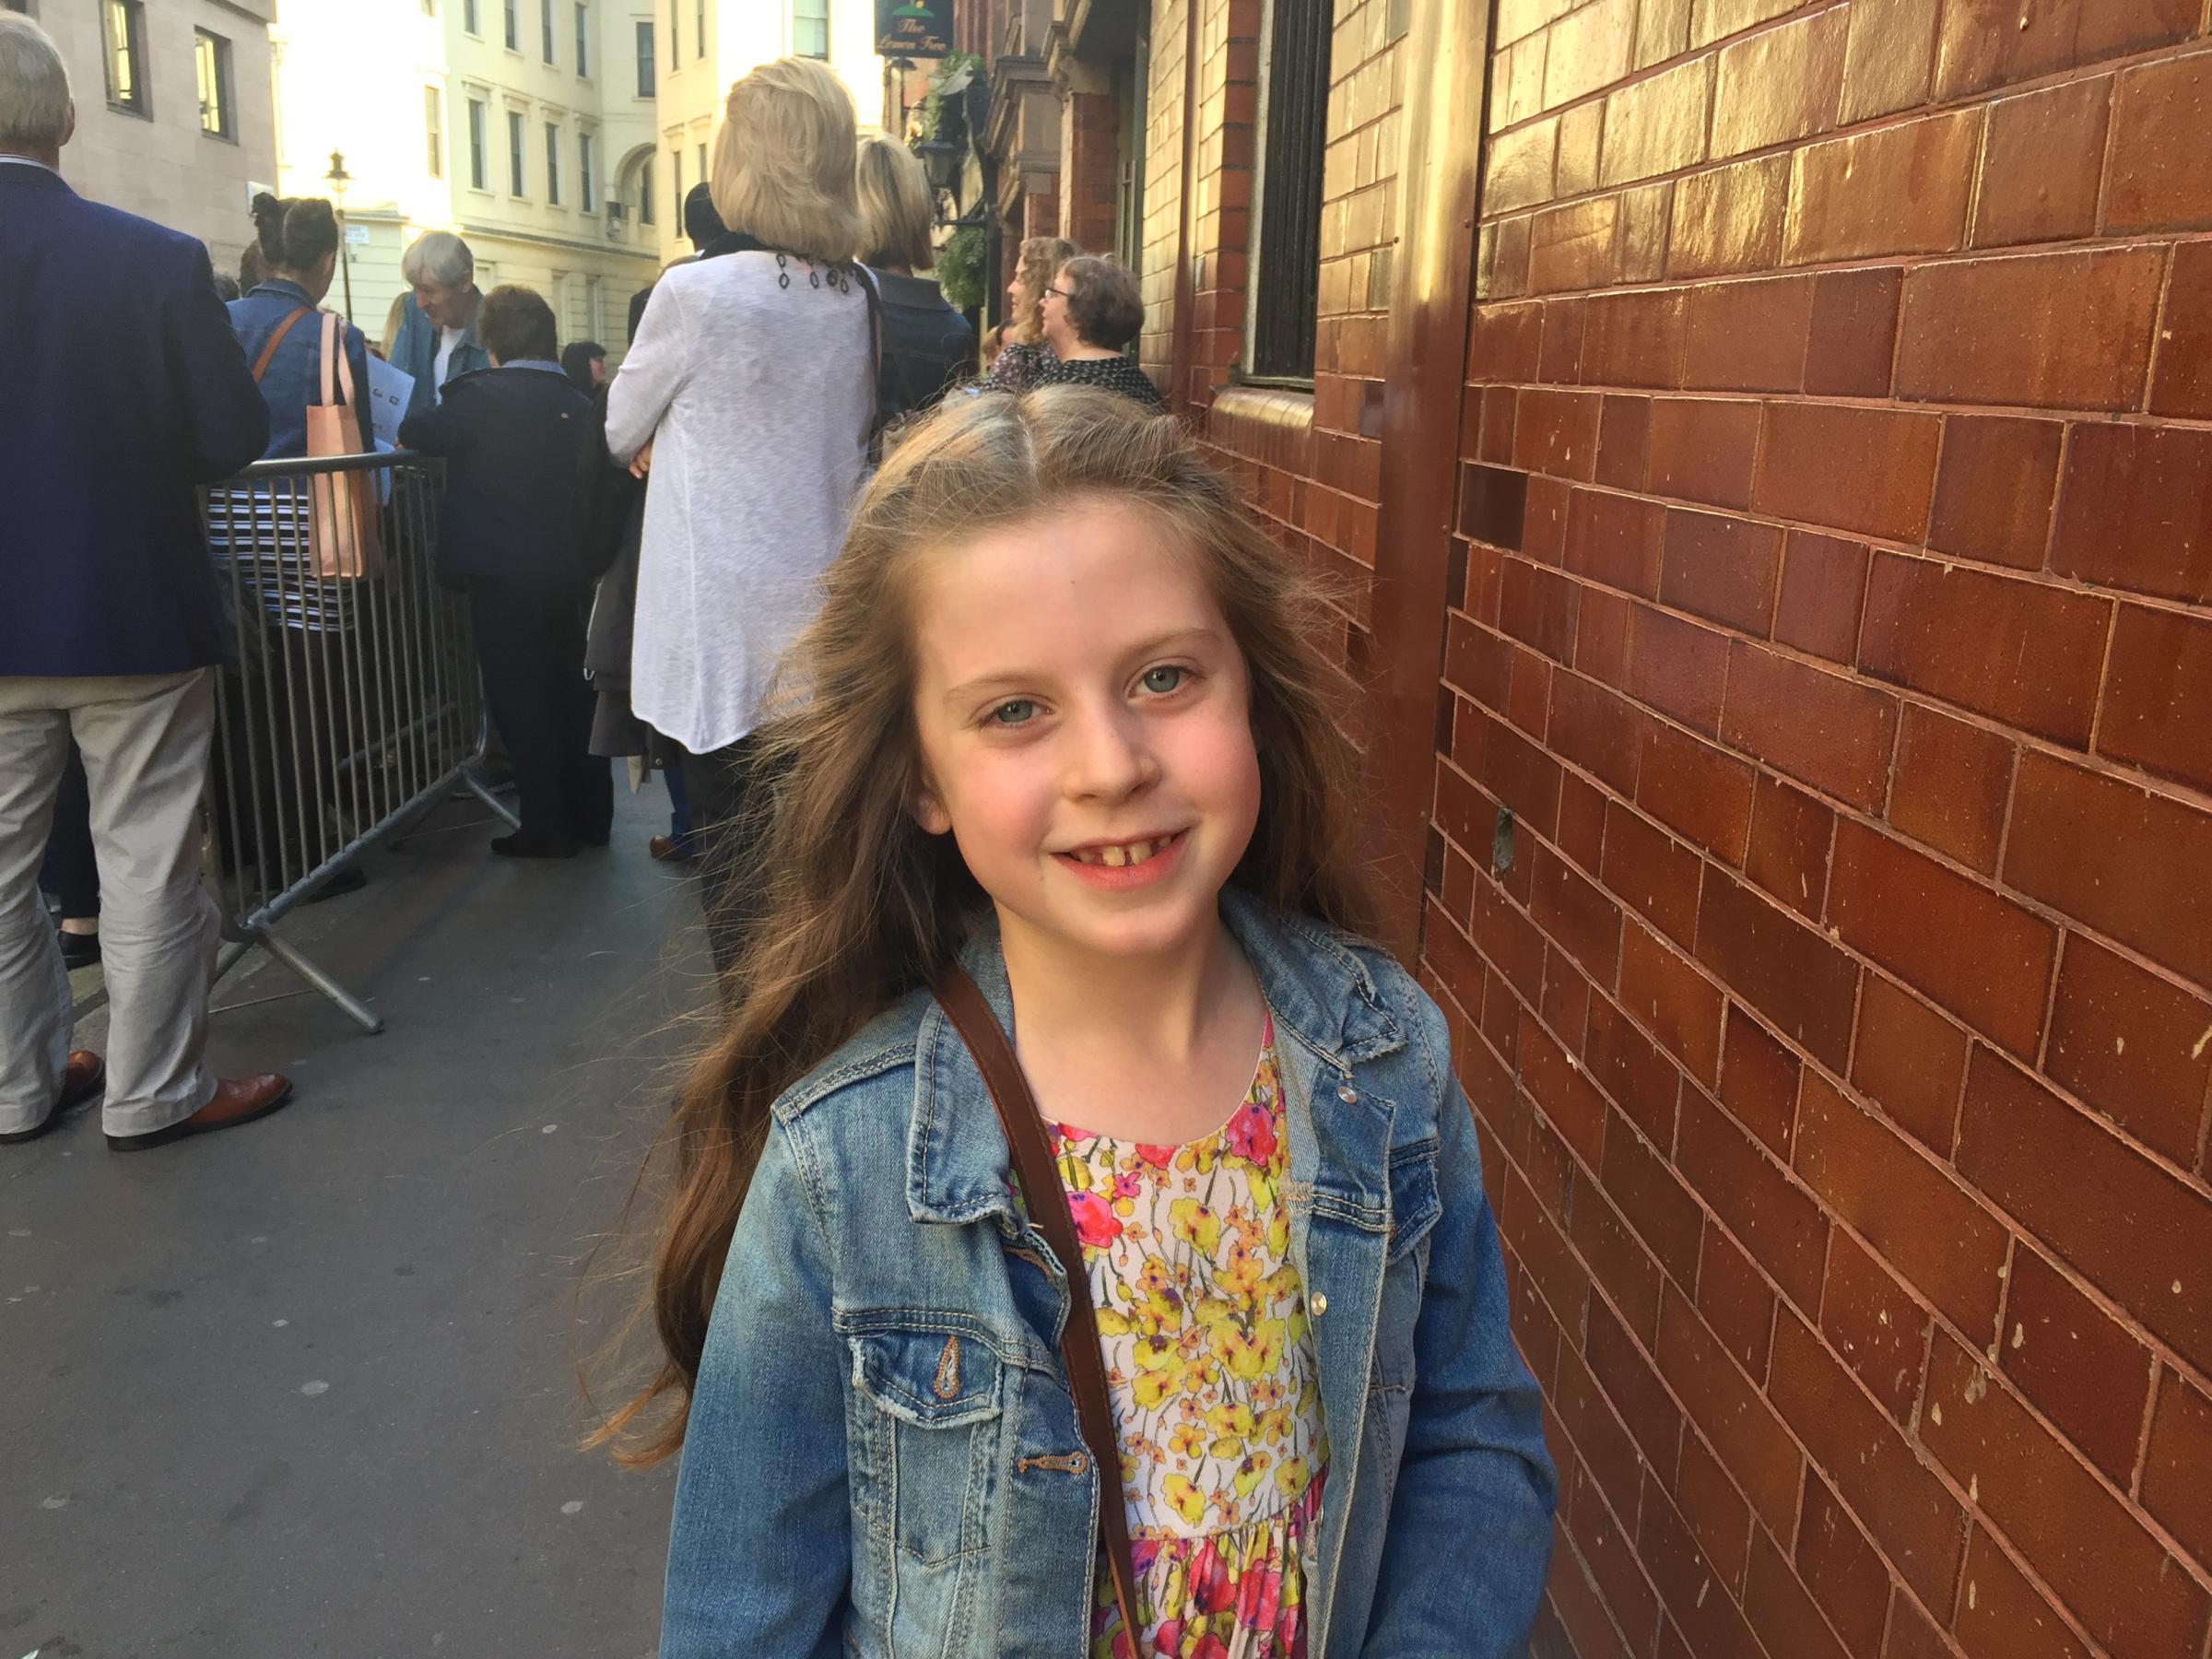 Cassia Reese McCarthy age 8 from Hampton performed her ... - Richmond and Twickenham Times